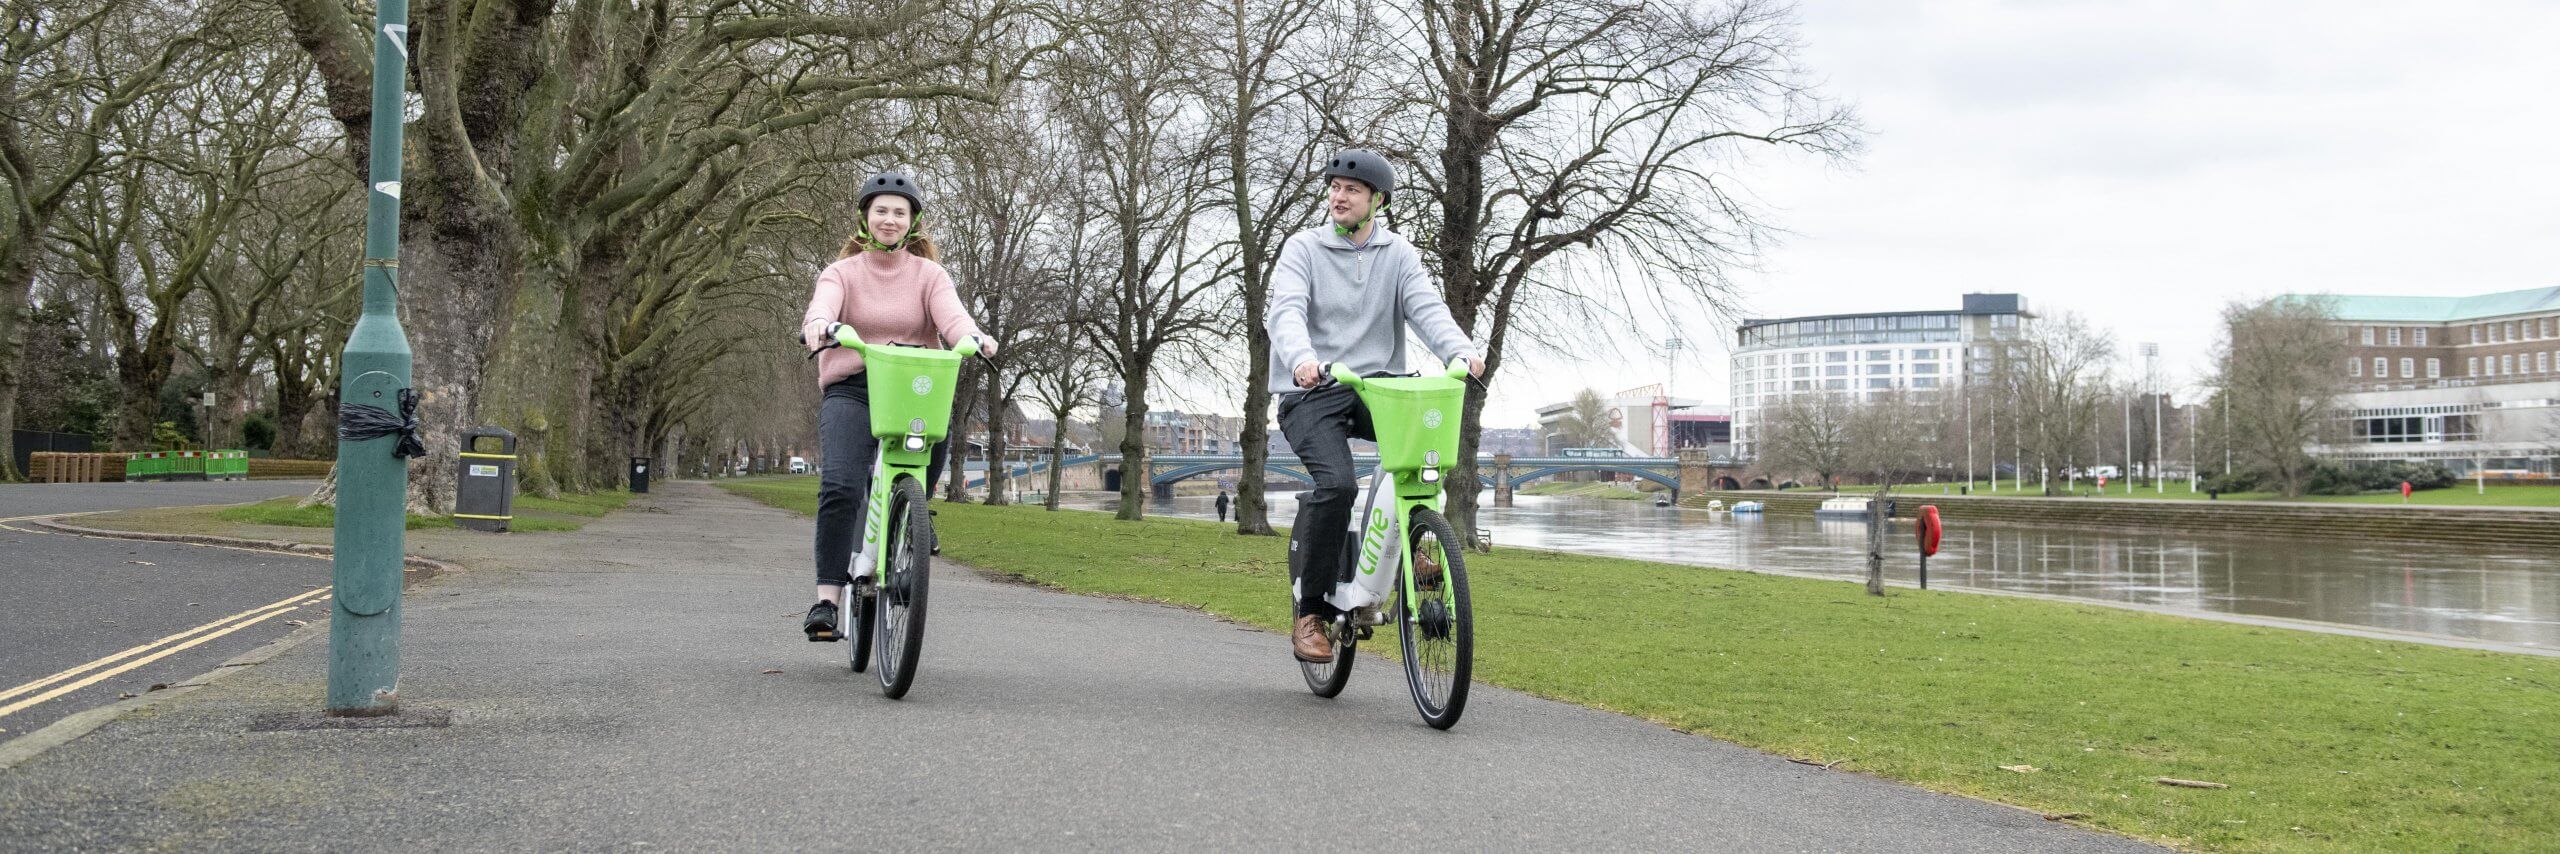 A man and woman riding E-bikes along the embankment in winter